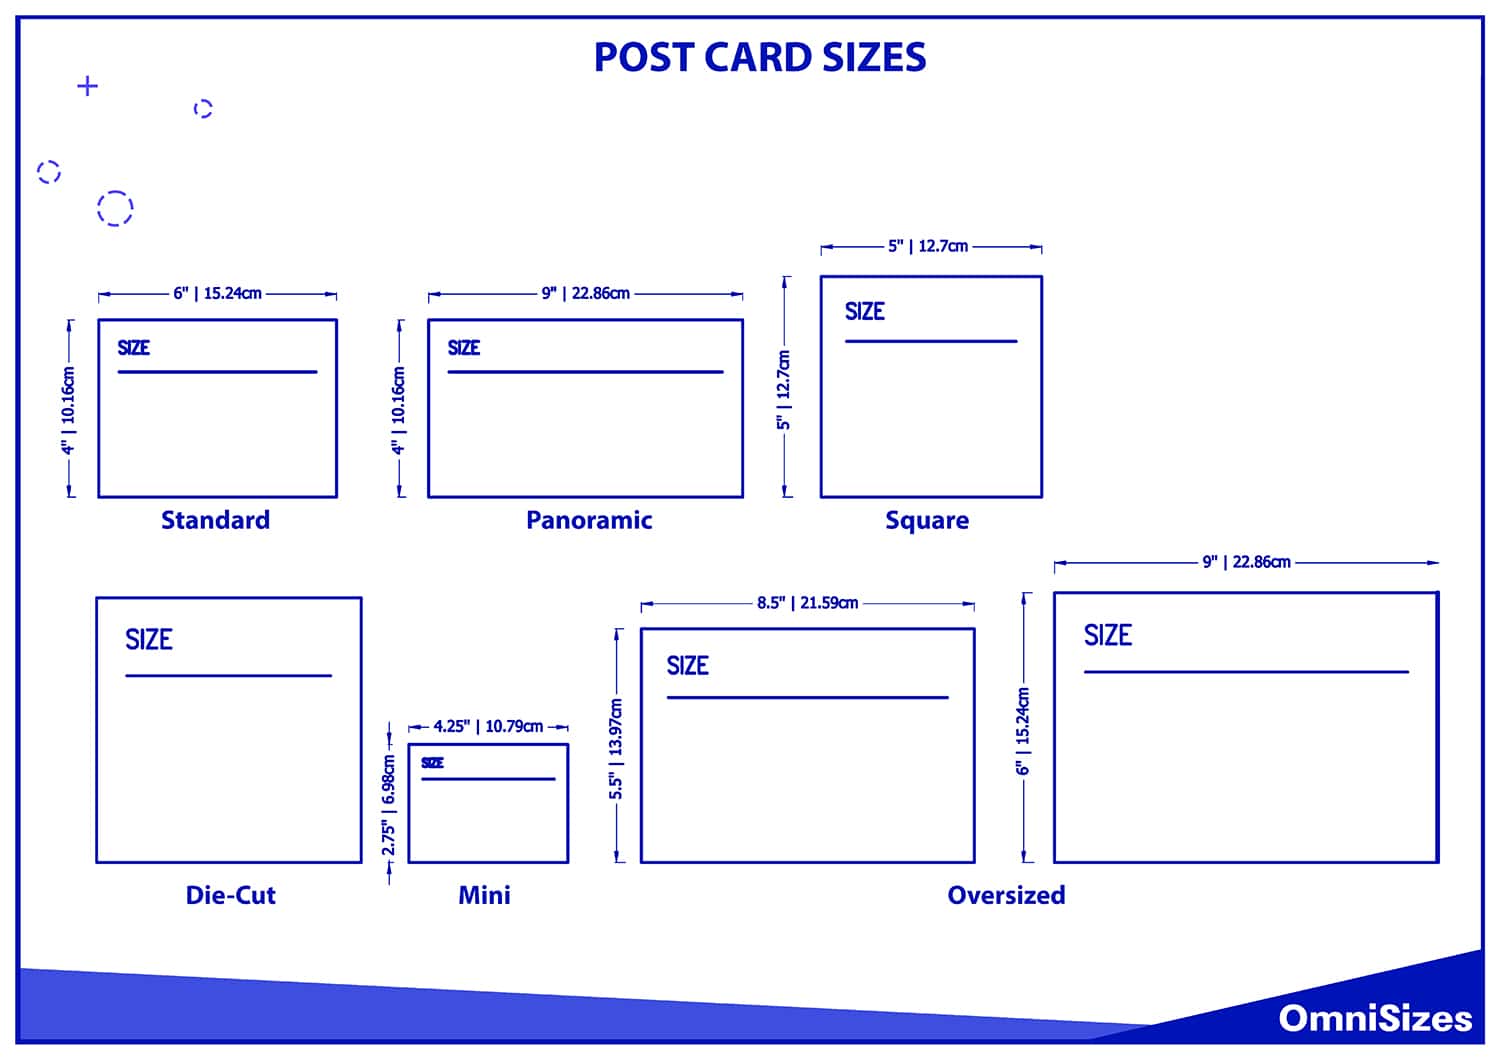 Post card sizes